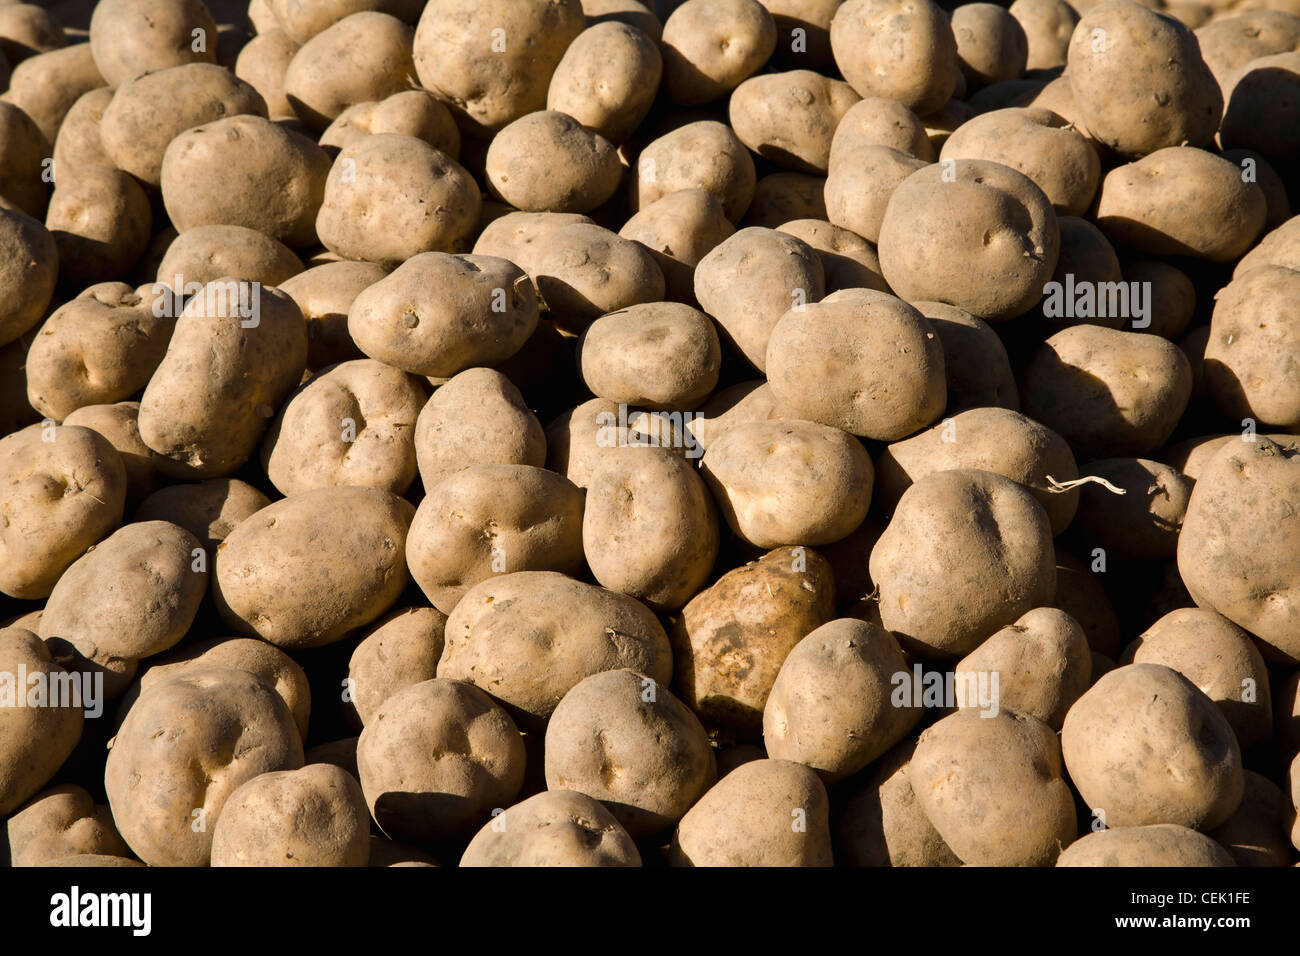 Agriculture - Seed potatoes ready for planting at a local family produce farm / Little Compton, Rhode Island, USA. Stock Photo